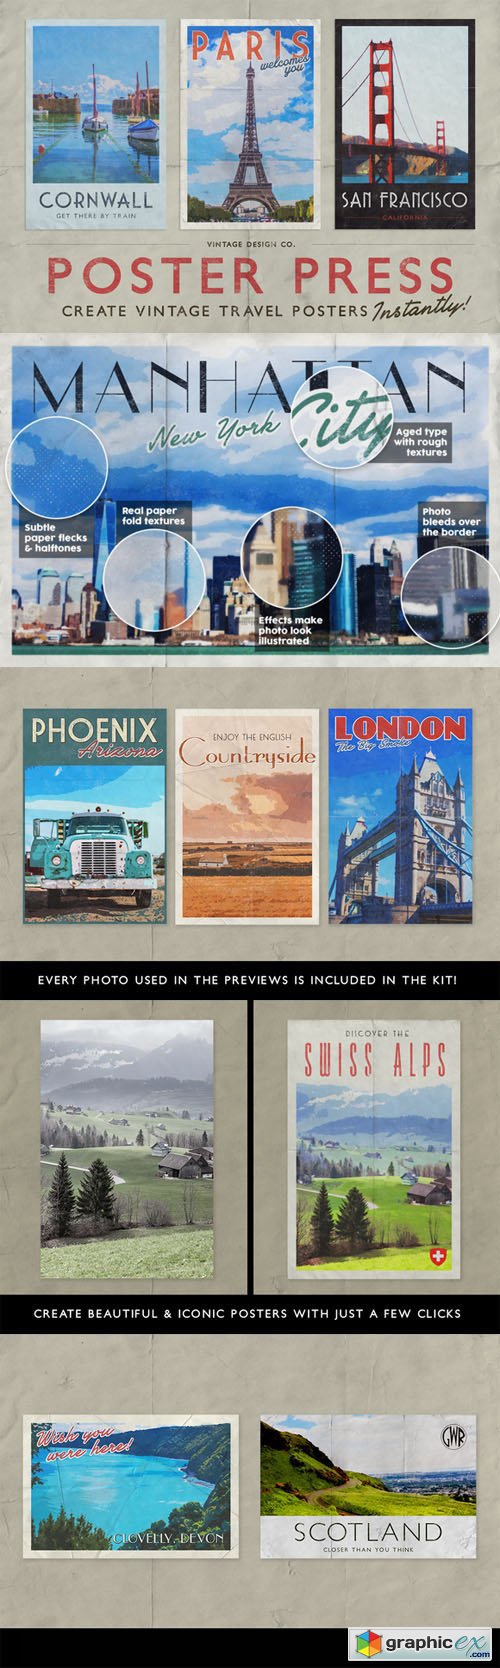 PosterPress - Instant Travel Posters